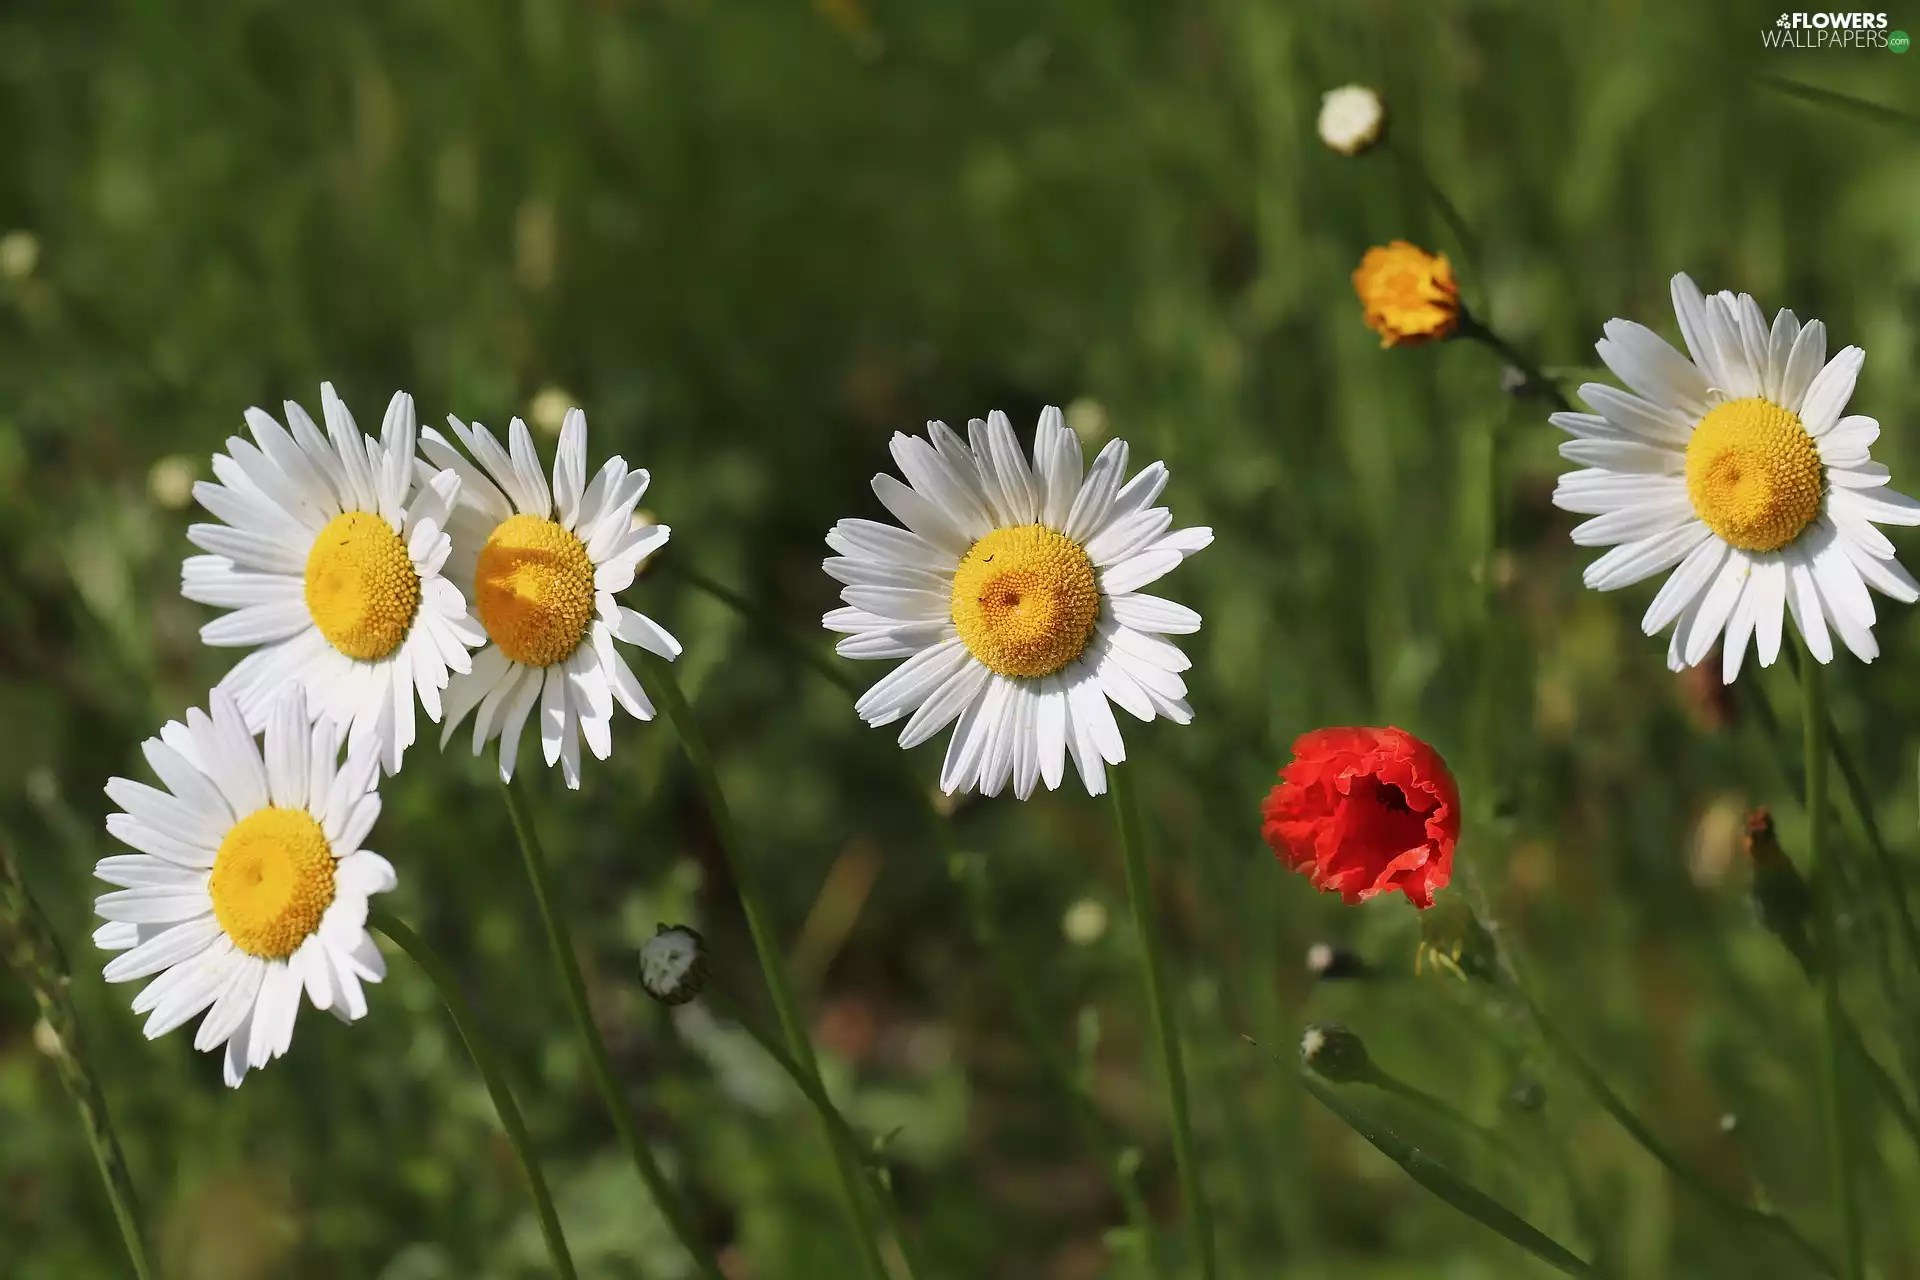 red weed, Flowers, daisy